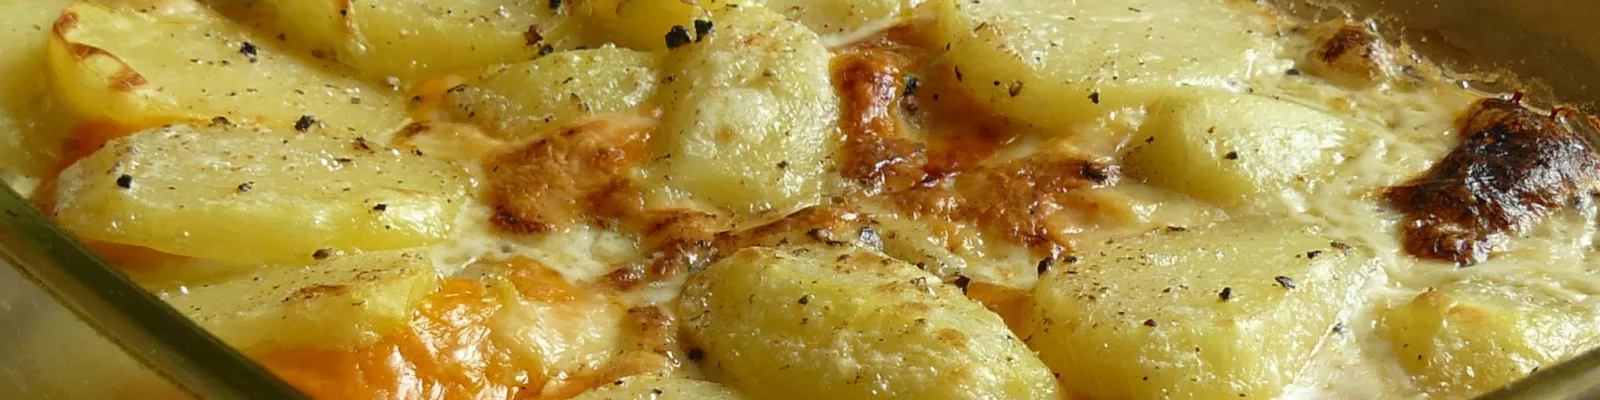 Cheese and potato casserole from Poznan 3